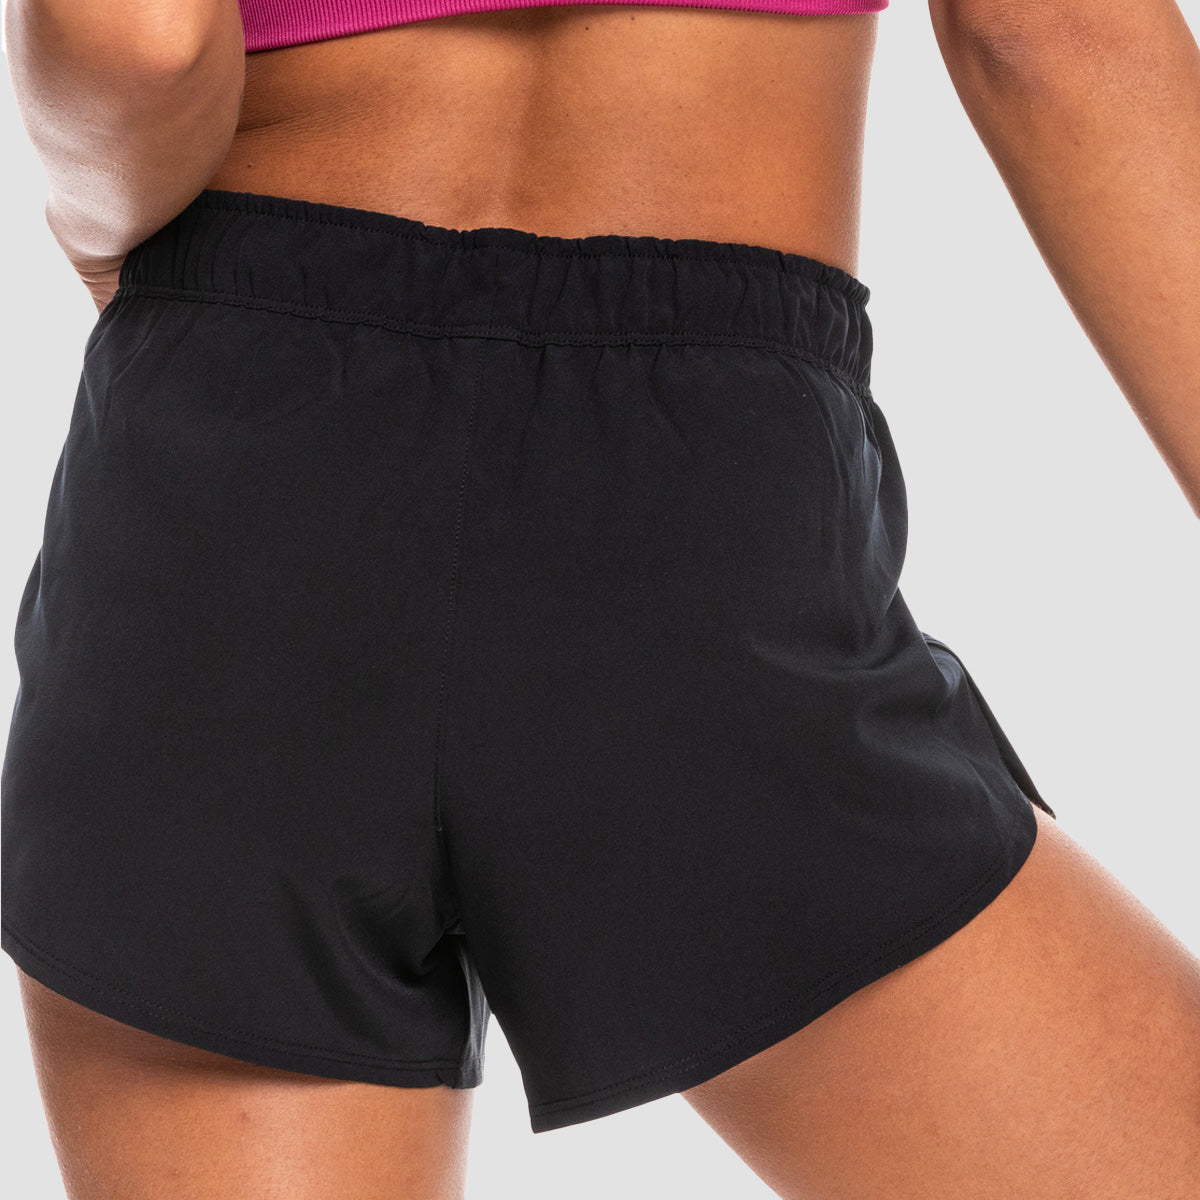 Roxy Corsica Calling Workout Shorts Anthracite - Womens